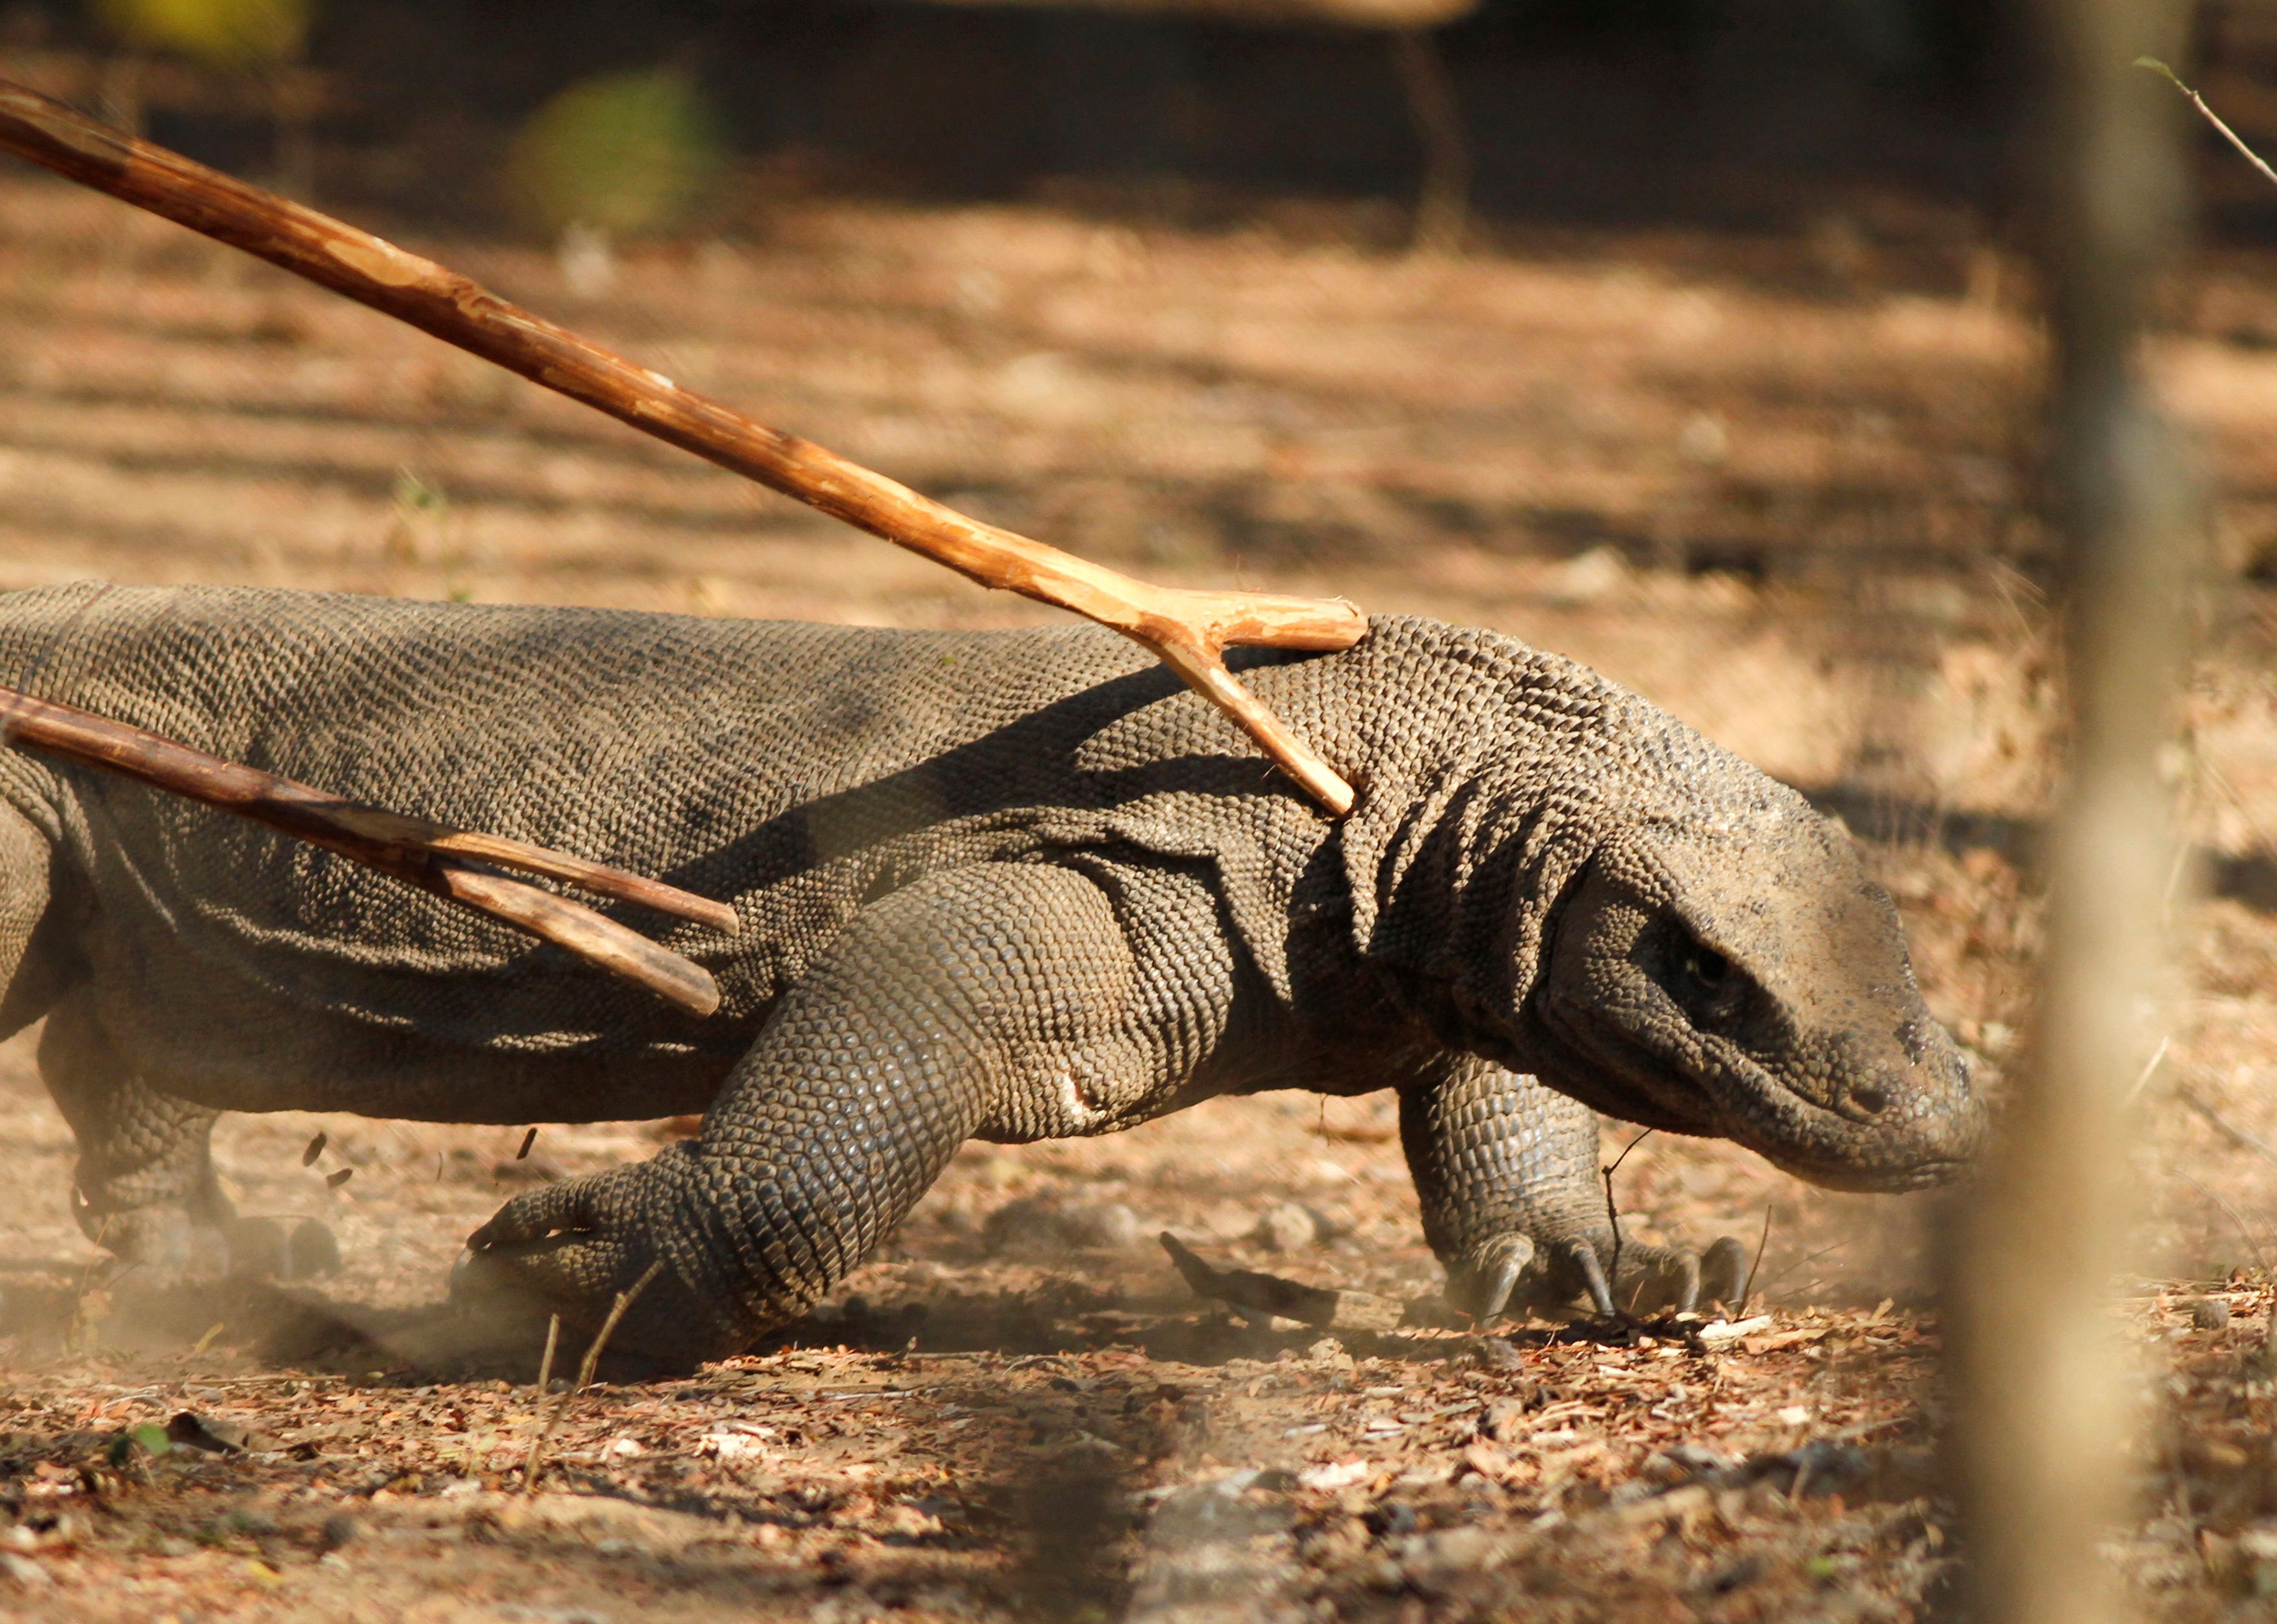 Seeing Komodo dragons now costs $250 and tourism workers are striking over  it | CNN